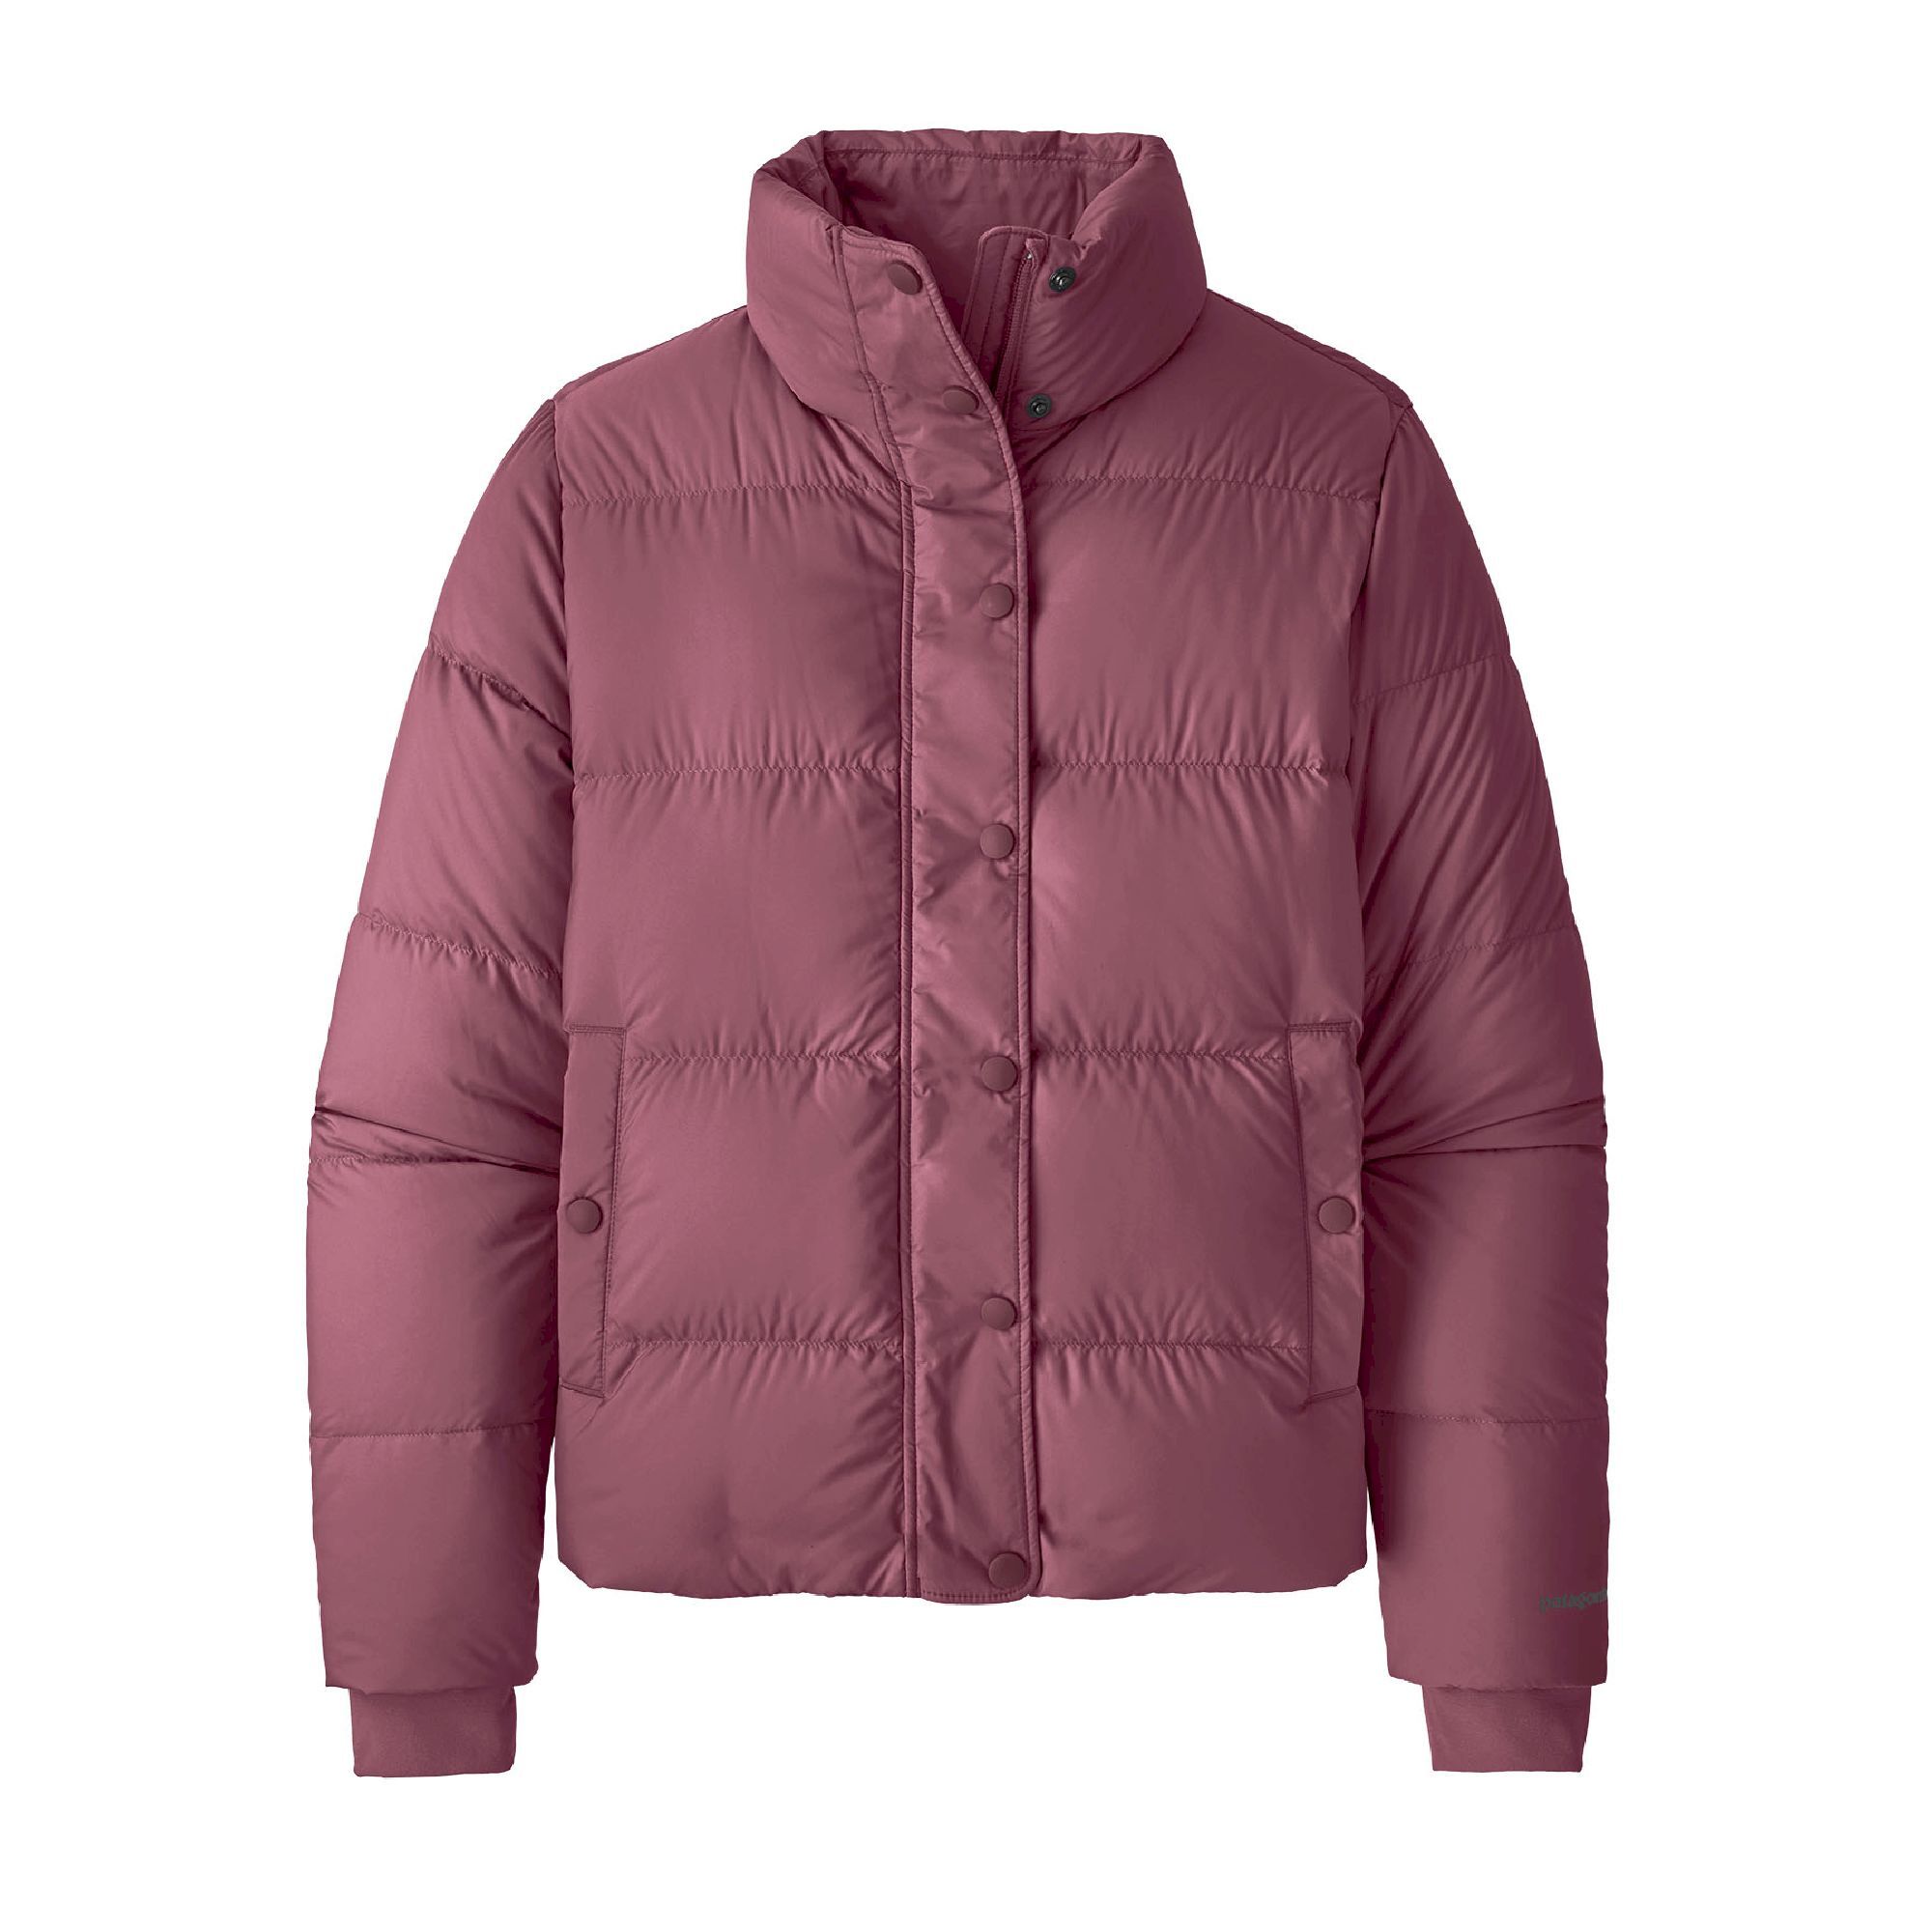 Patagonia Silent Down Jkt - Giacca in piumino - Donna